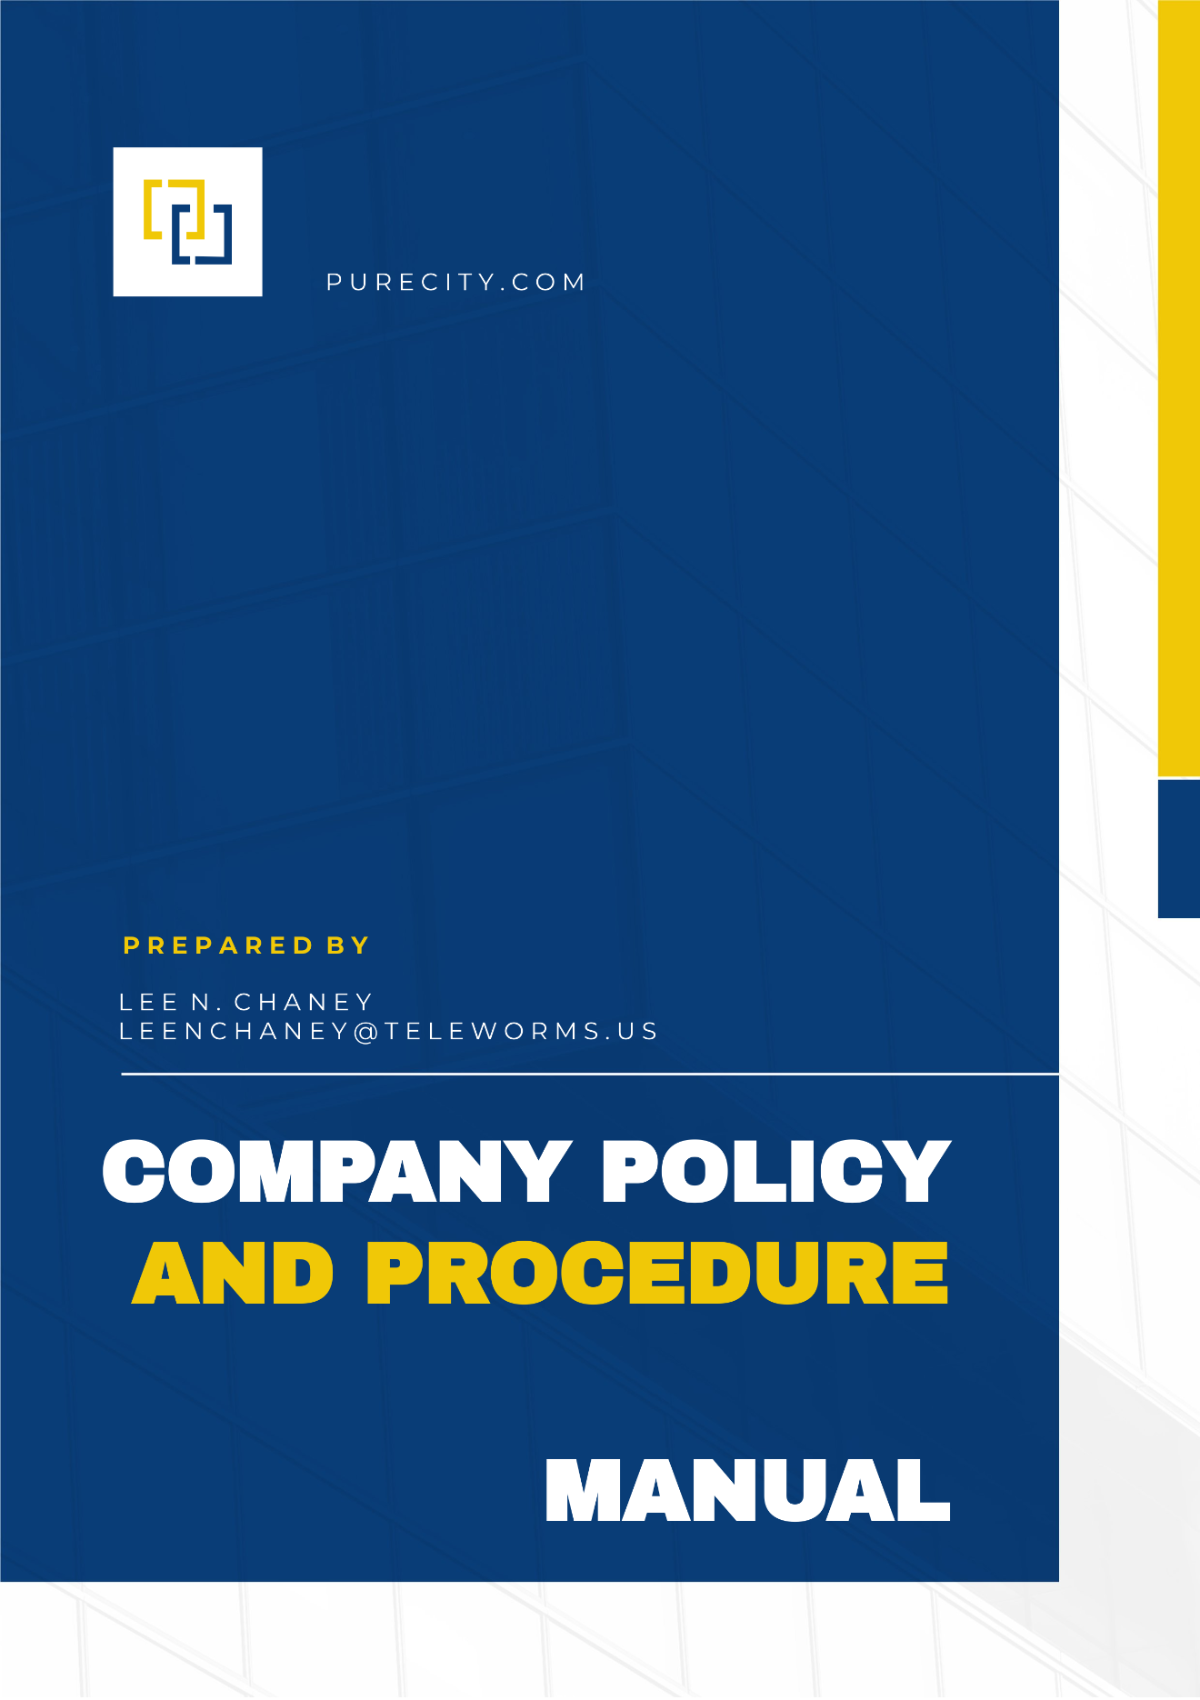 Company Policy and Procedure Manual Template